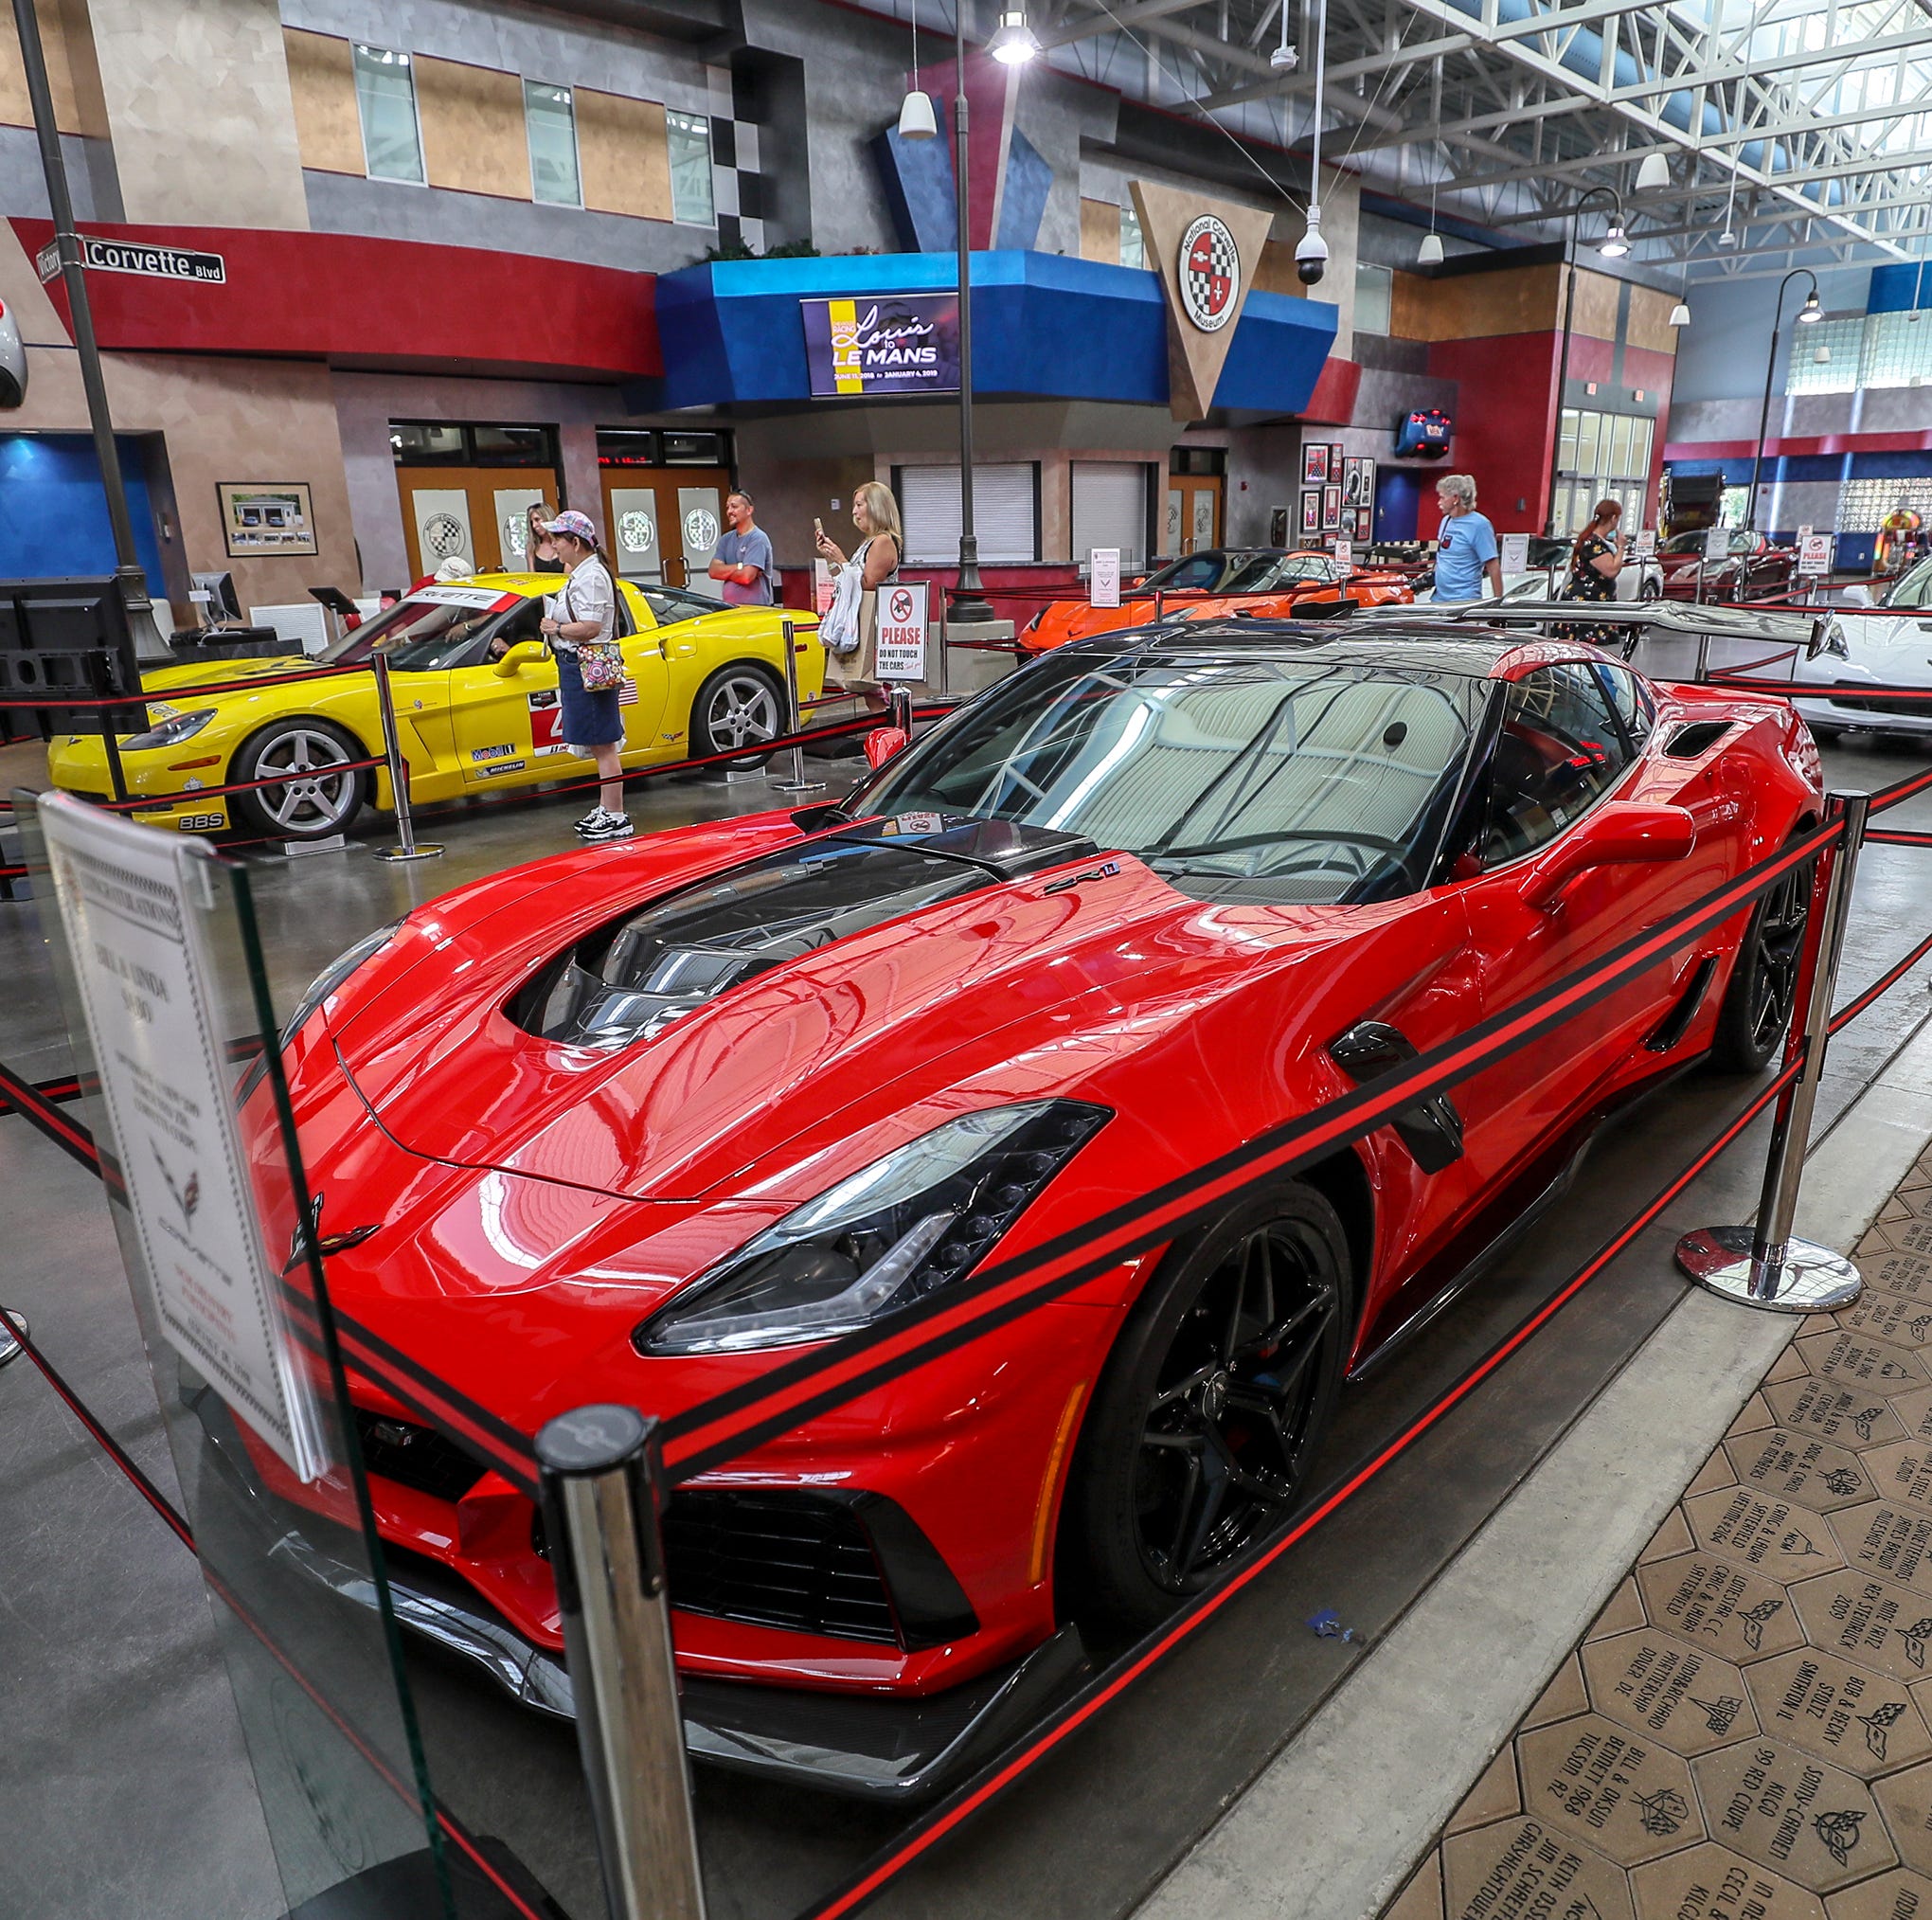 A shiny C7 Corvette on display at the National Corvette Museum in Bowling Green.  August 14, 2018